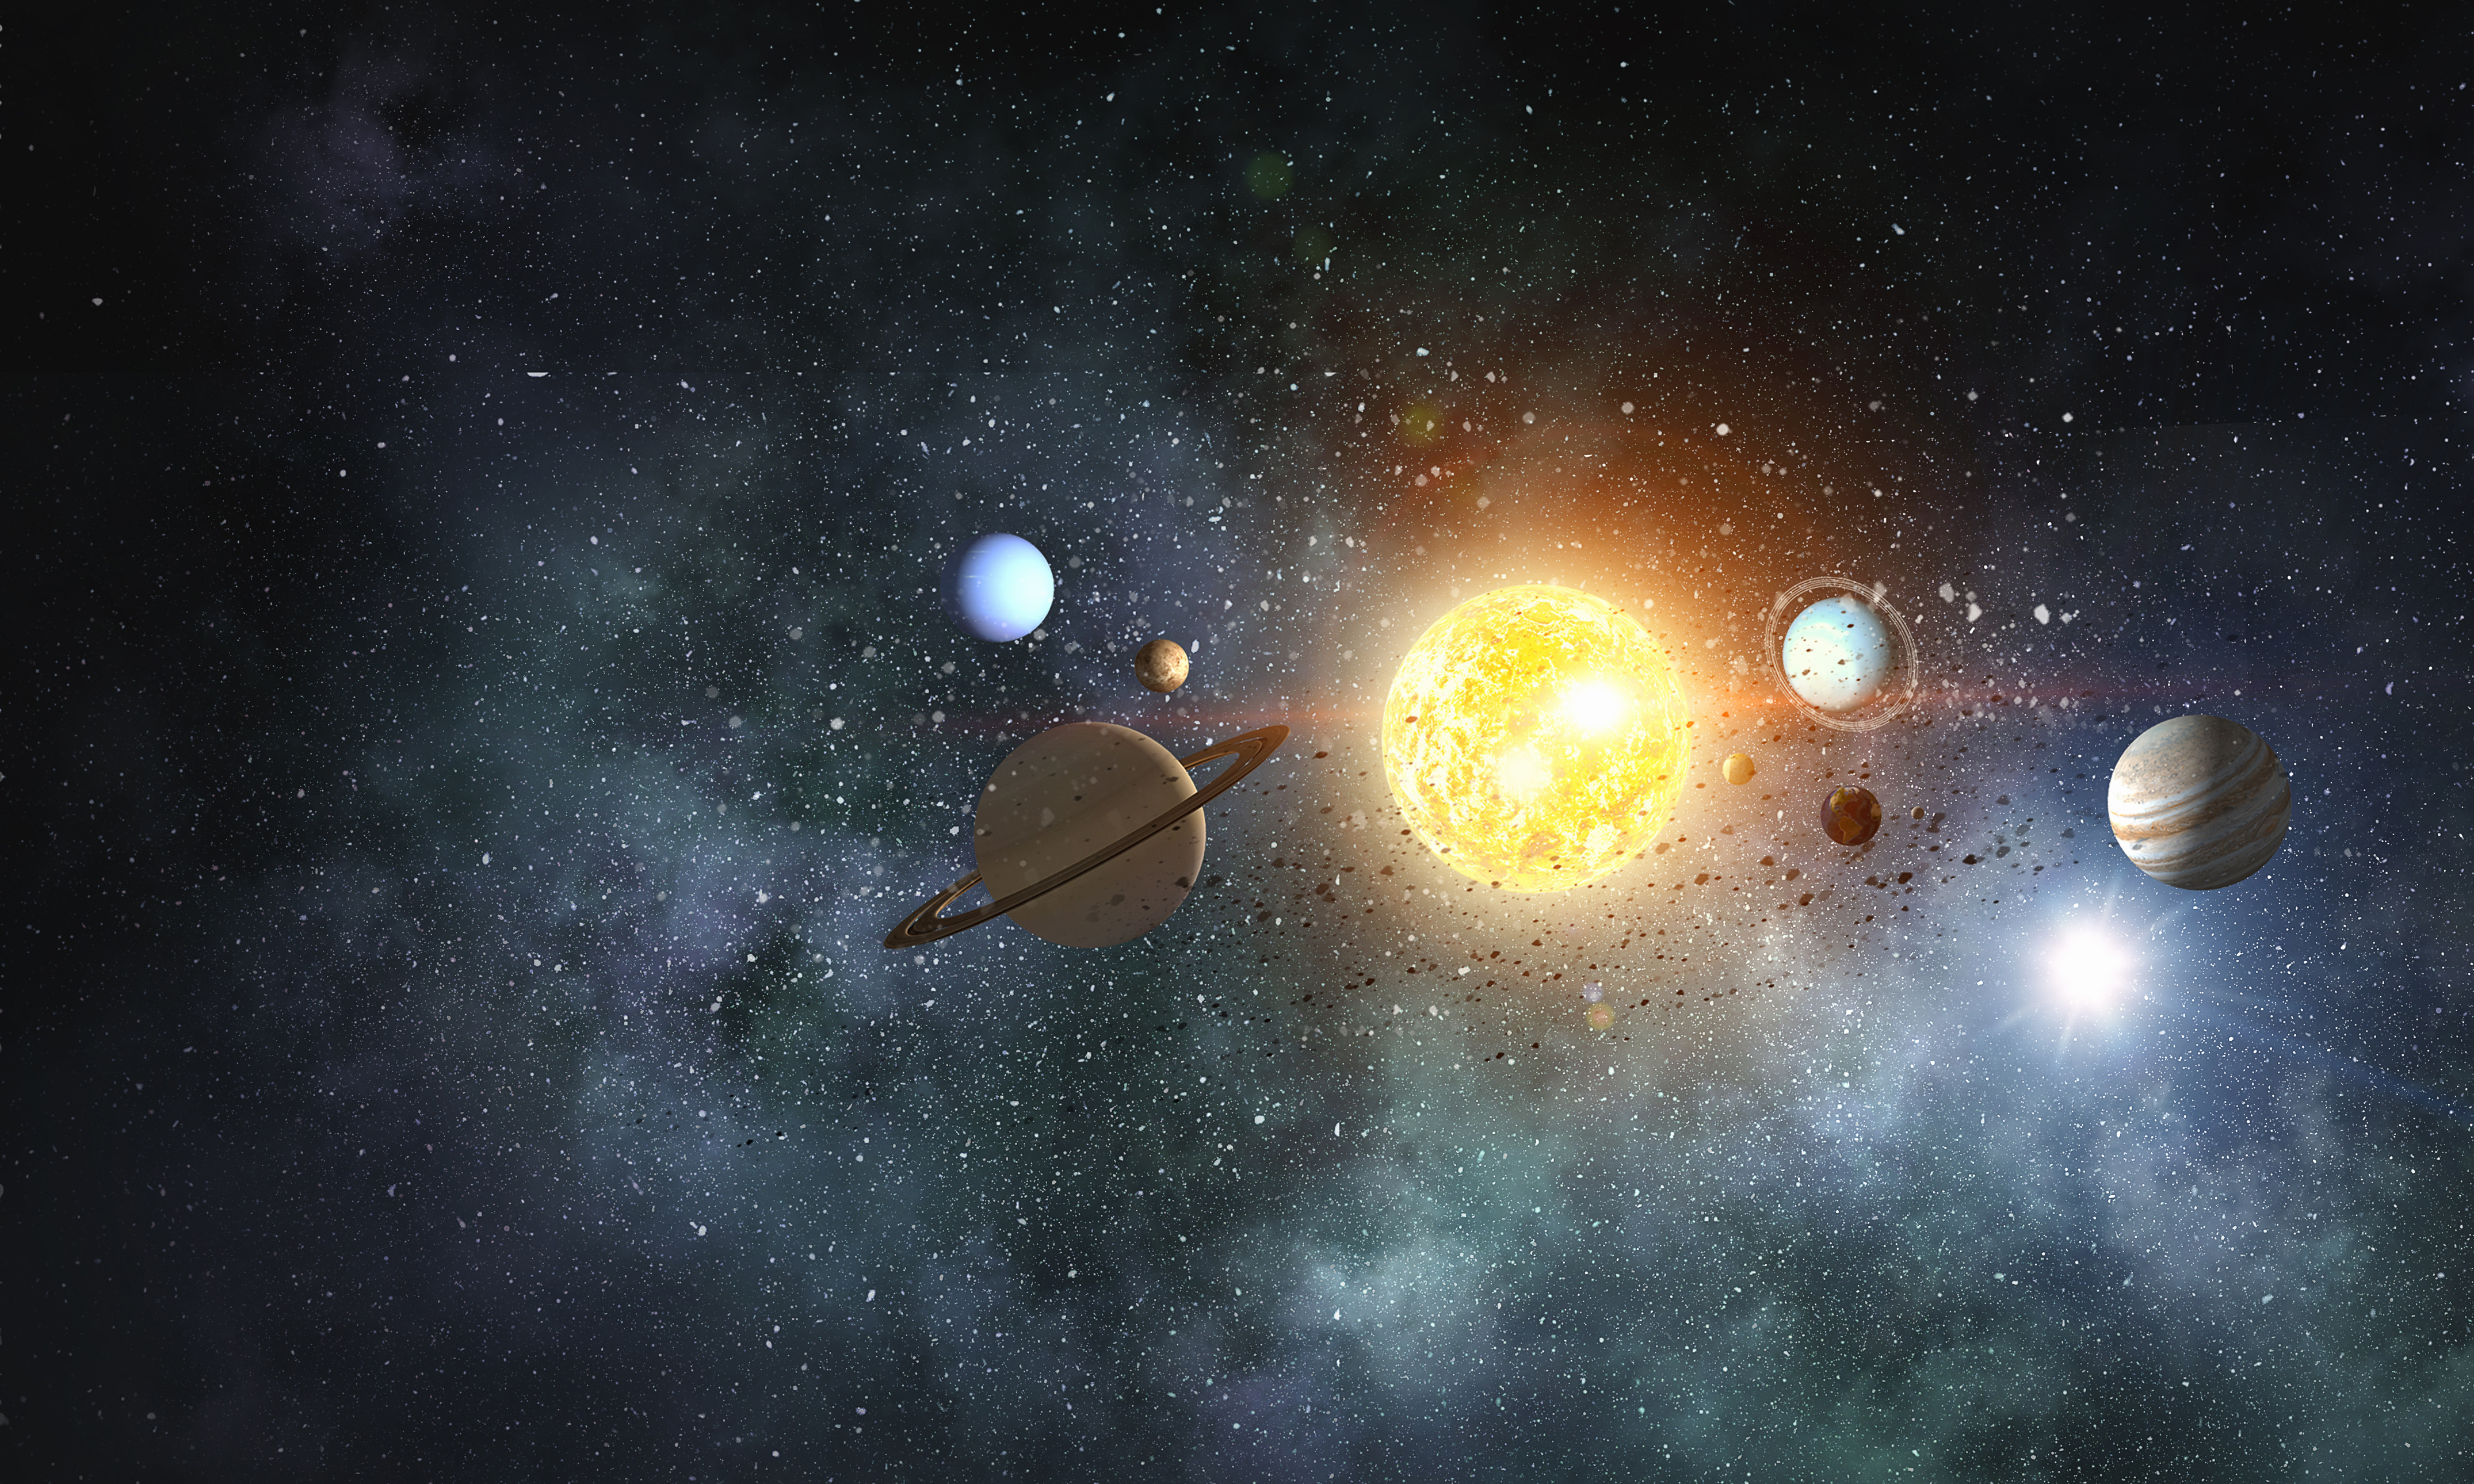 Artist rendered image of the solar system. Image depicts the sun with the planets of our solar system surrounding it 